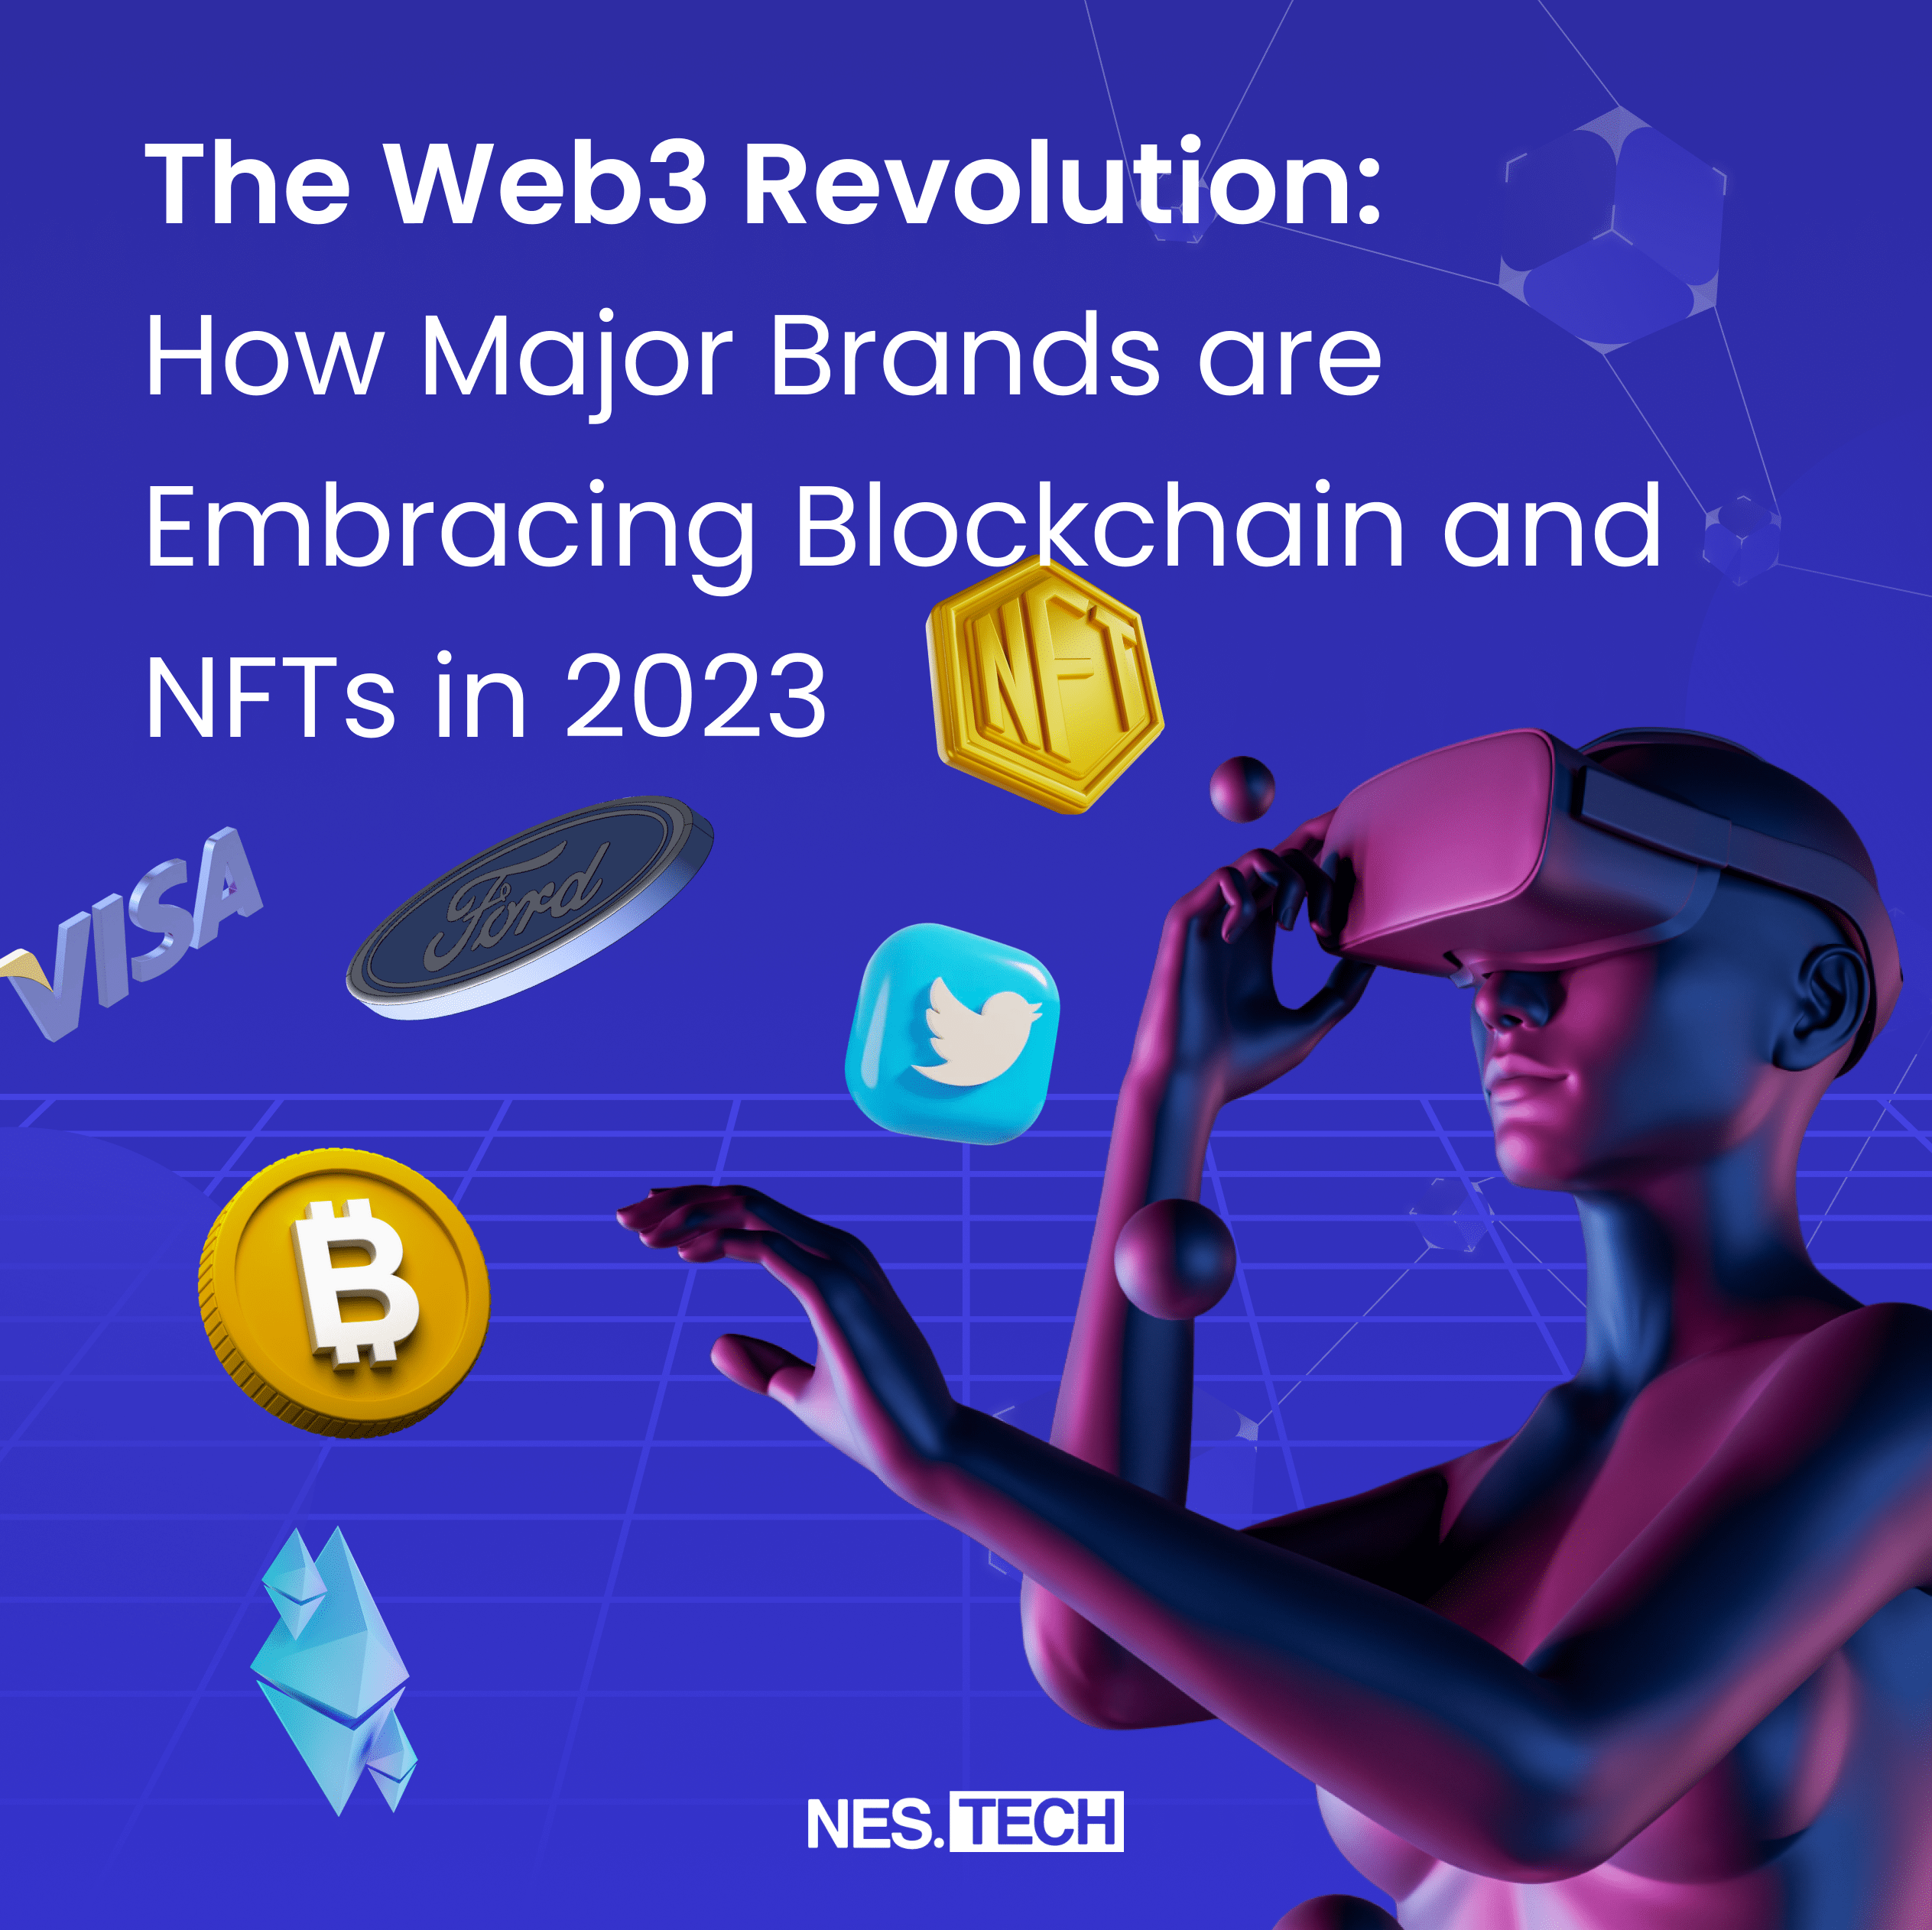 The Web3 Revolution: How Top Brands Will Use Blockchain In 2023